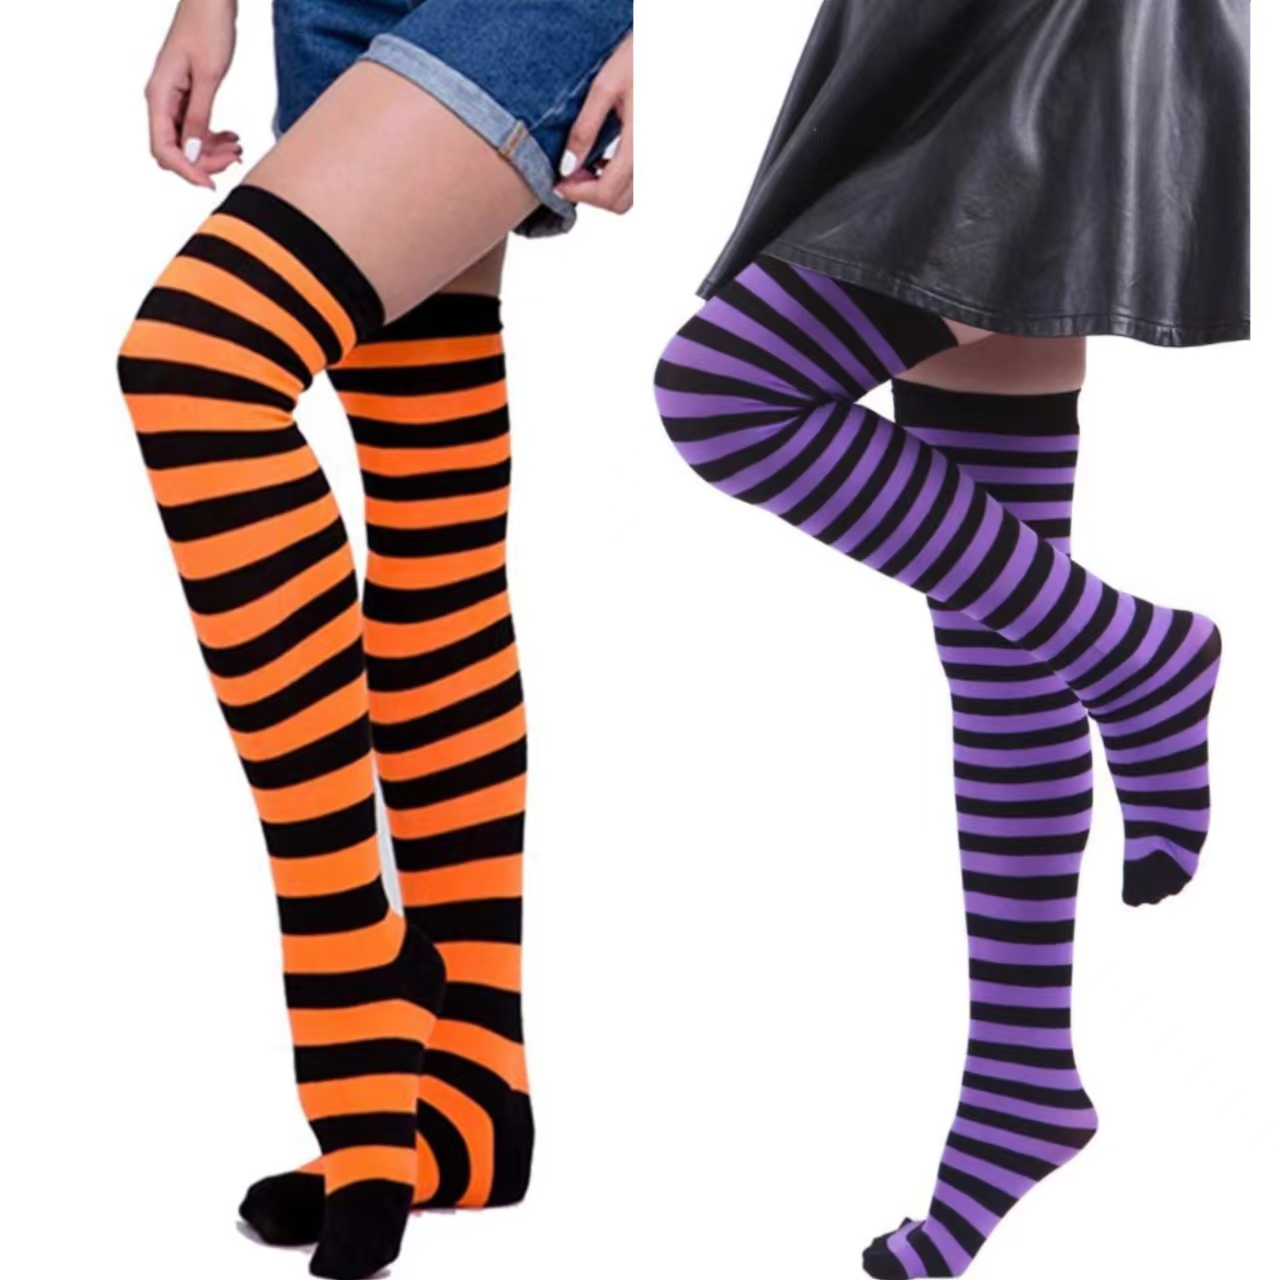 1 Pair Striped Over The Knee Socks For Halloween Comfortable